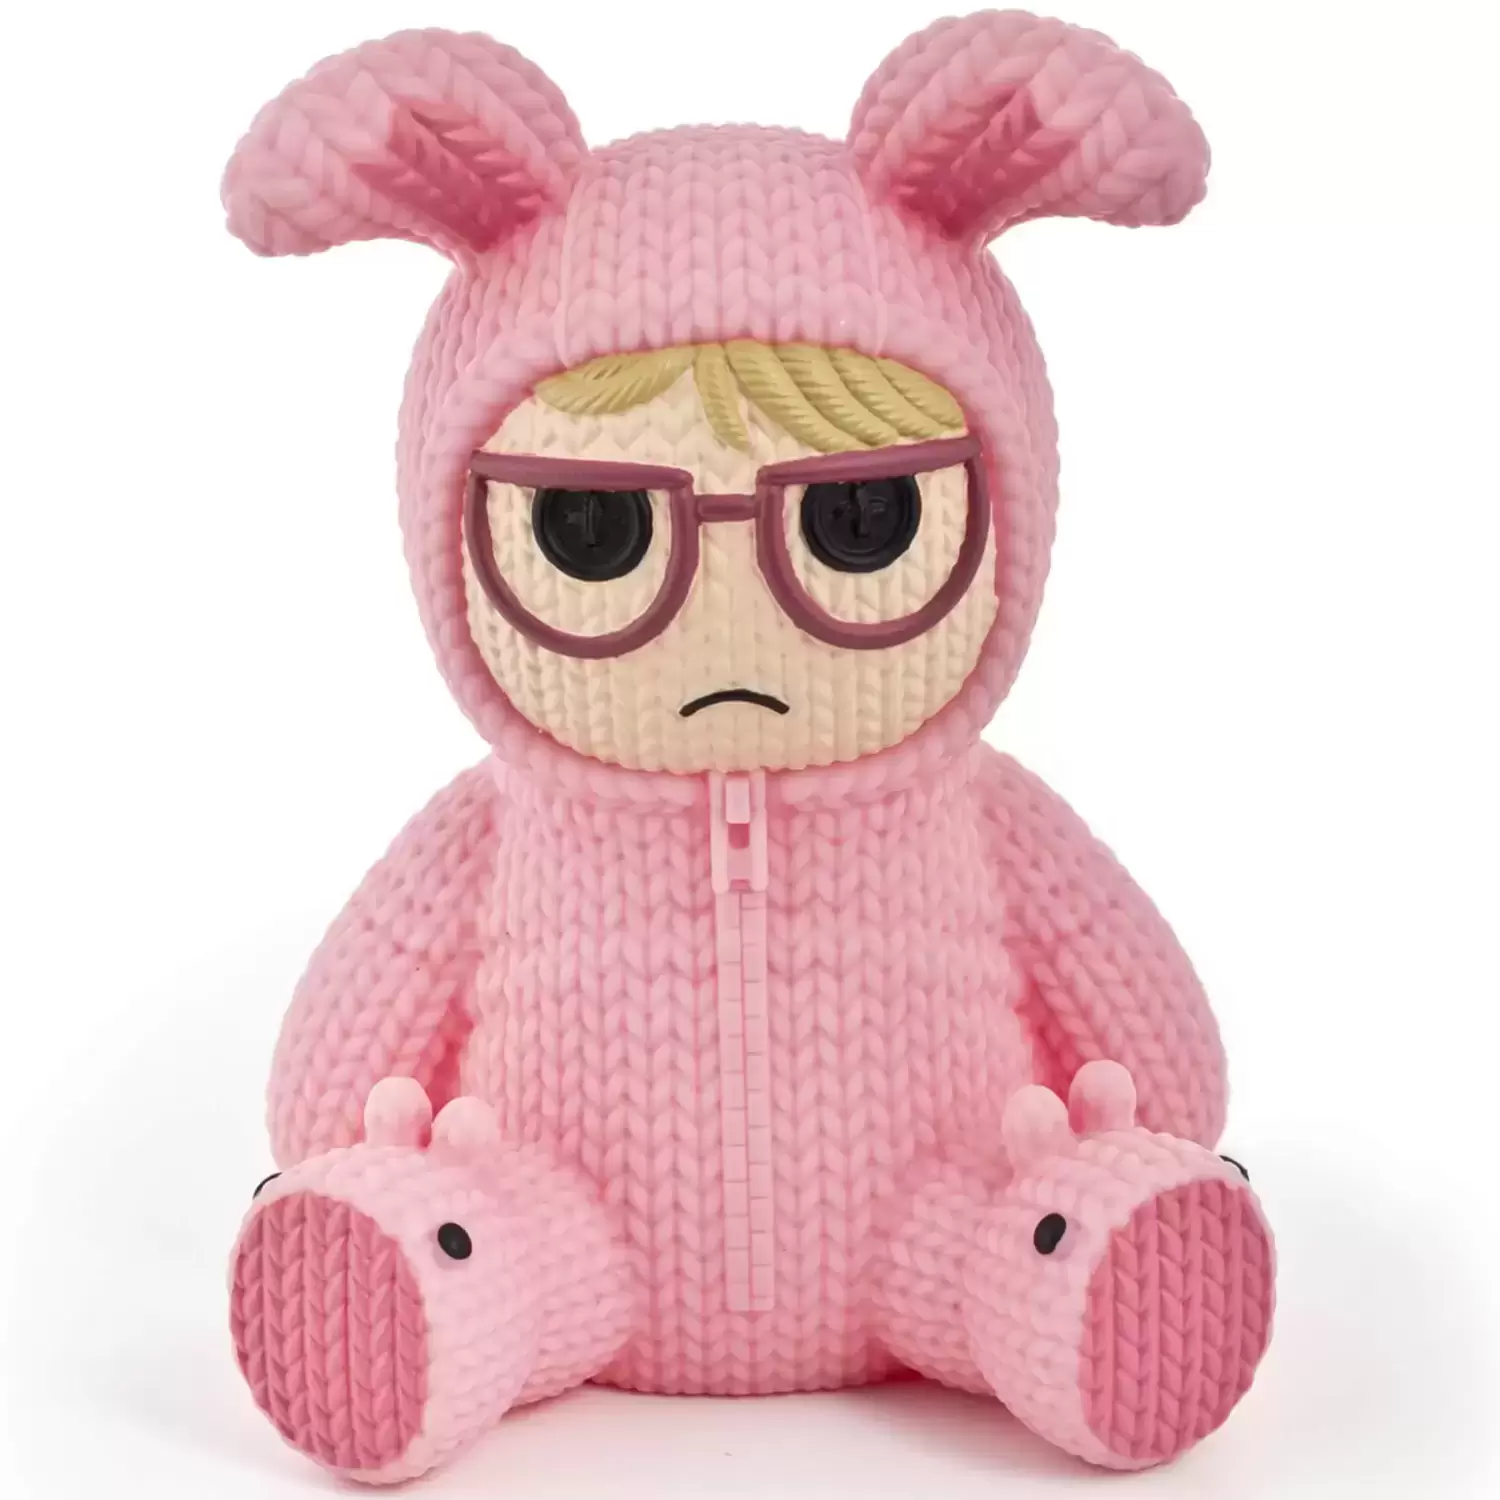 Handmade By Robots - A Christmas Story - Ralphie in Bunny Suit